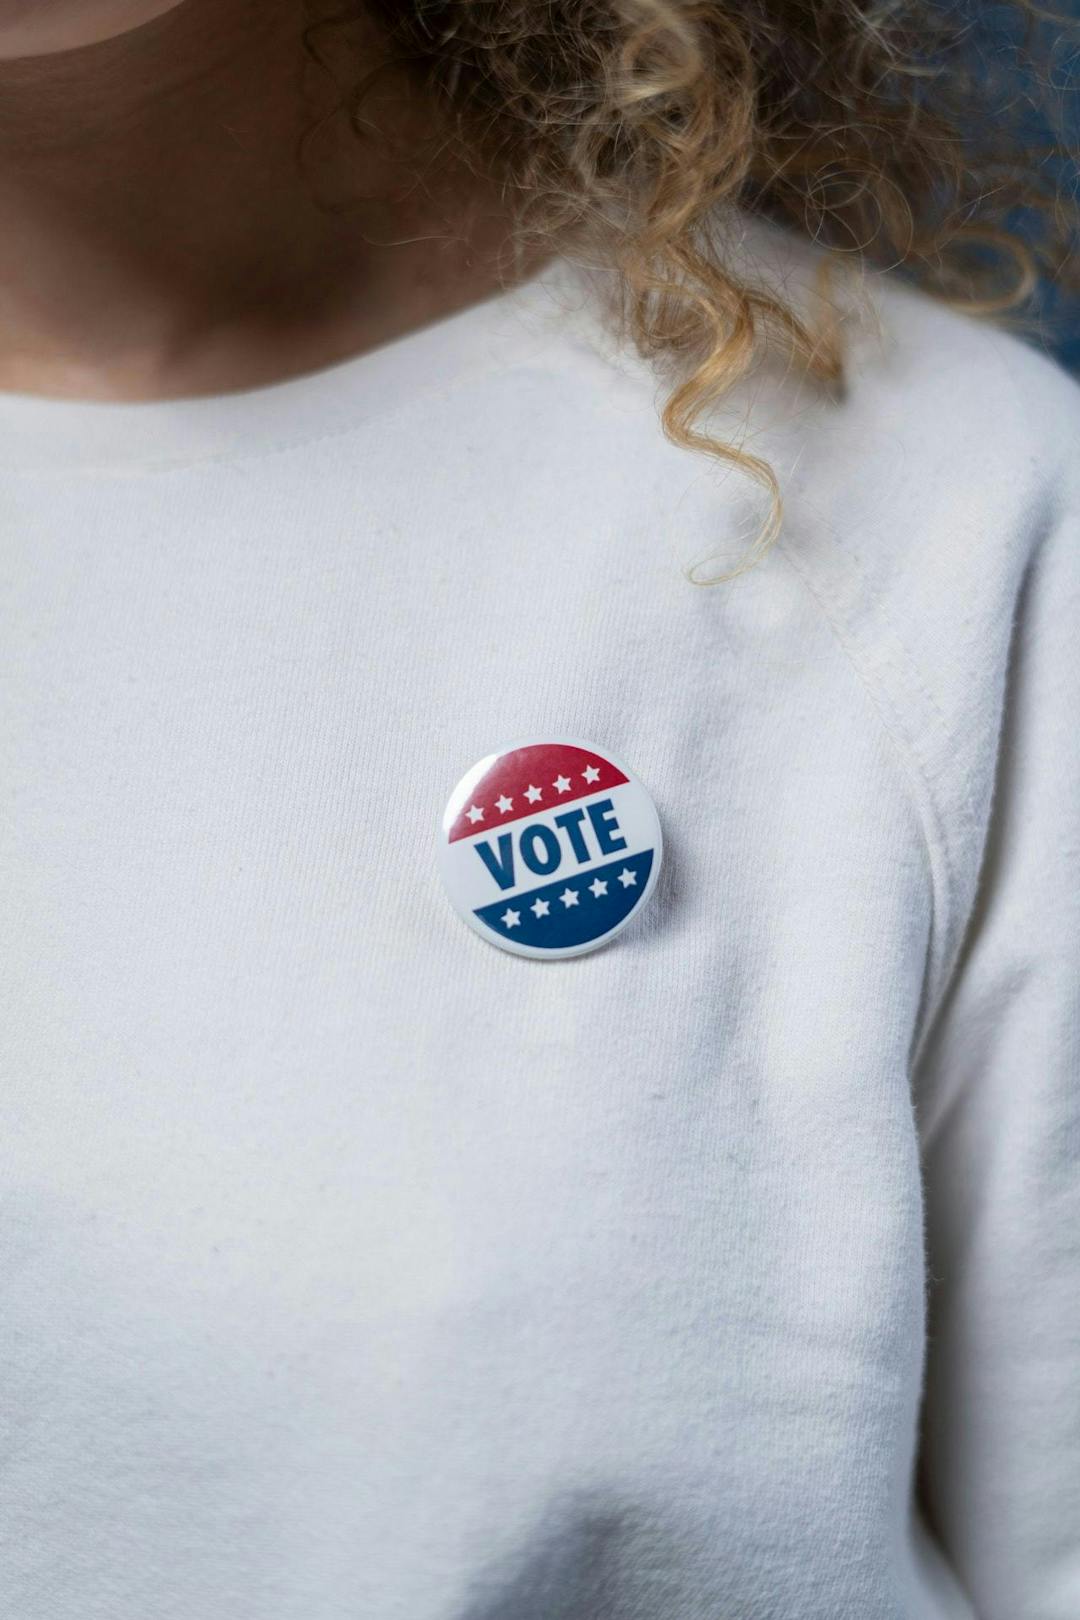 A person wearing a white shirt with a circular badge containing the word "VOTE" and stars in red, white, and blue.